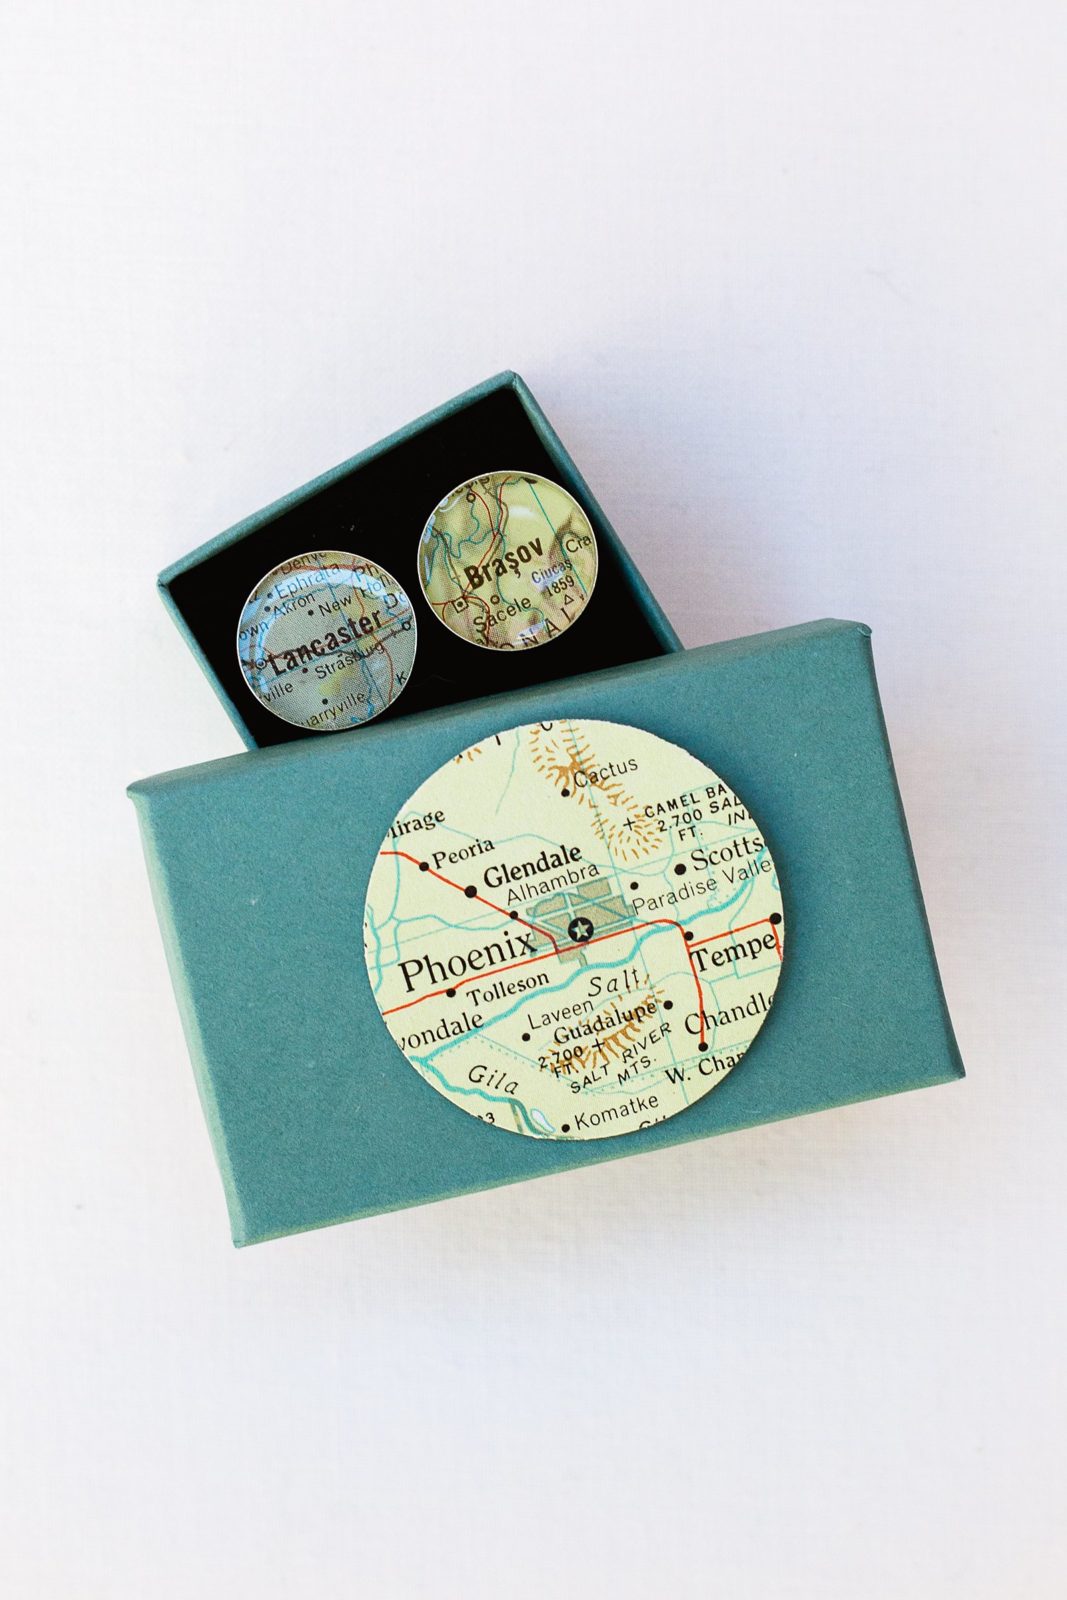 Groom's custom cufflinks with the cities he and his future wife were born by PMA Photography.